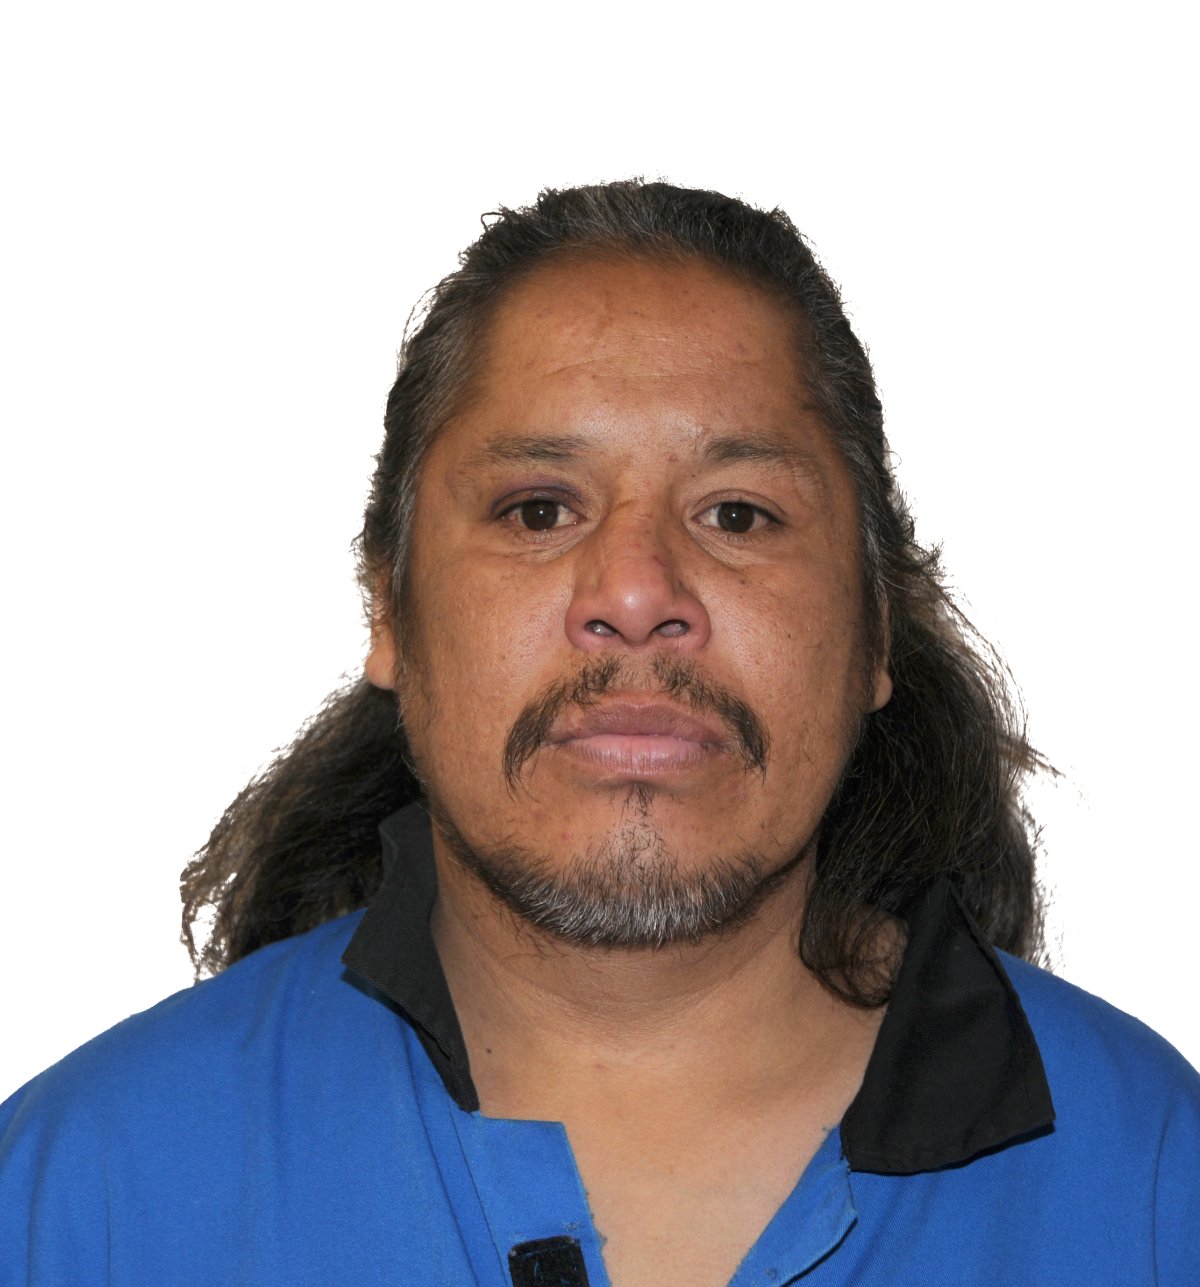 Police have arrested 40-year-old Lucien Maurice Crane Chief.